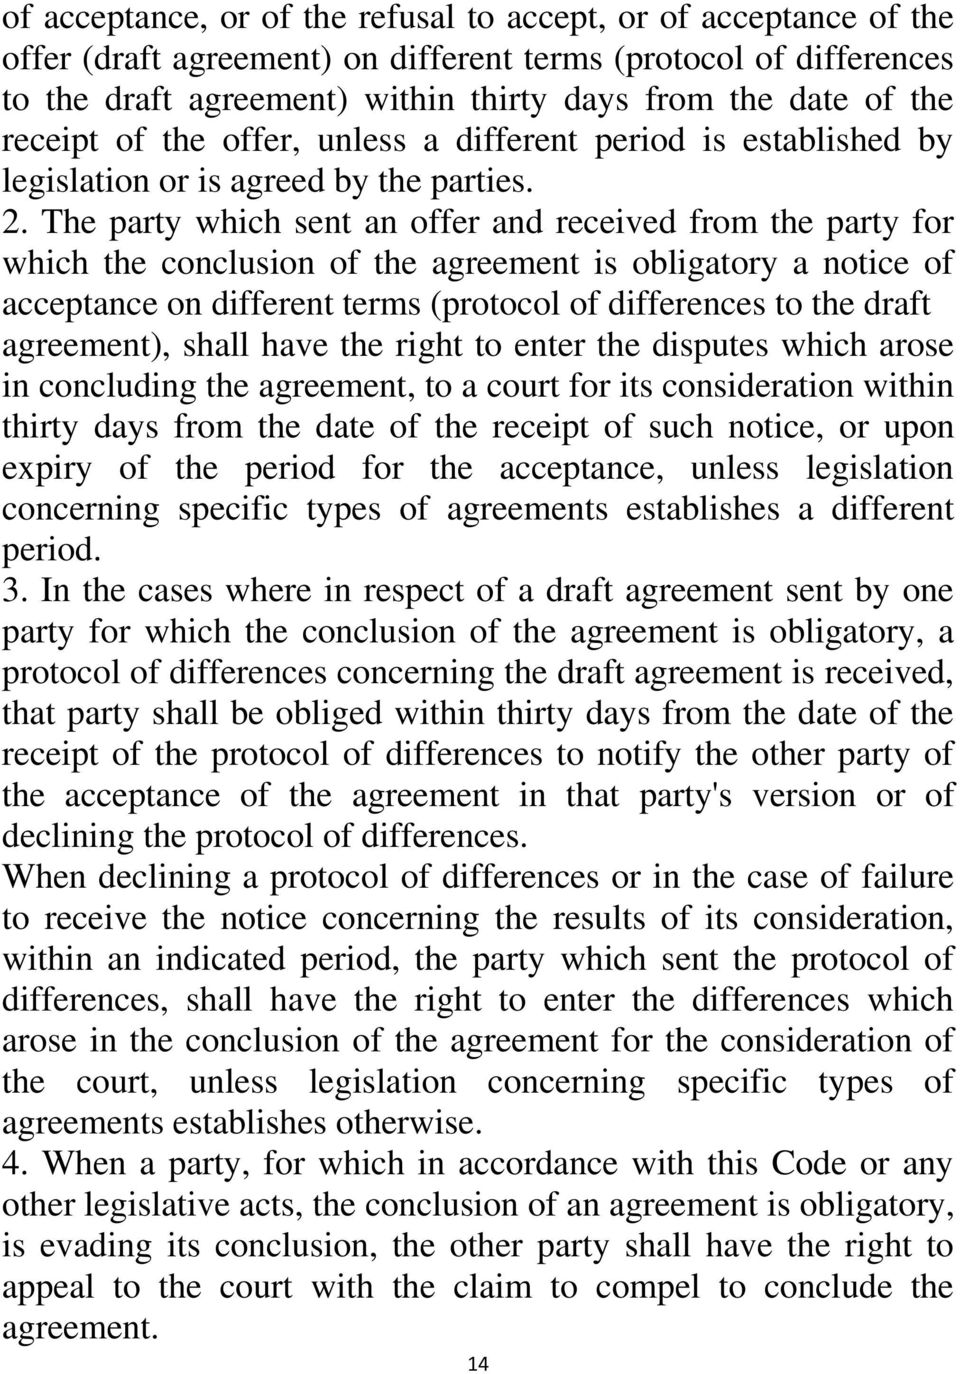 The party which sent an offer and received from the party for which the conclusion of the agreement is obligatory a notice of acceptance on different terms (protocol of differences to the draft